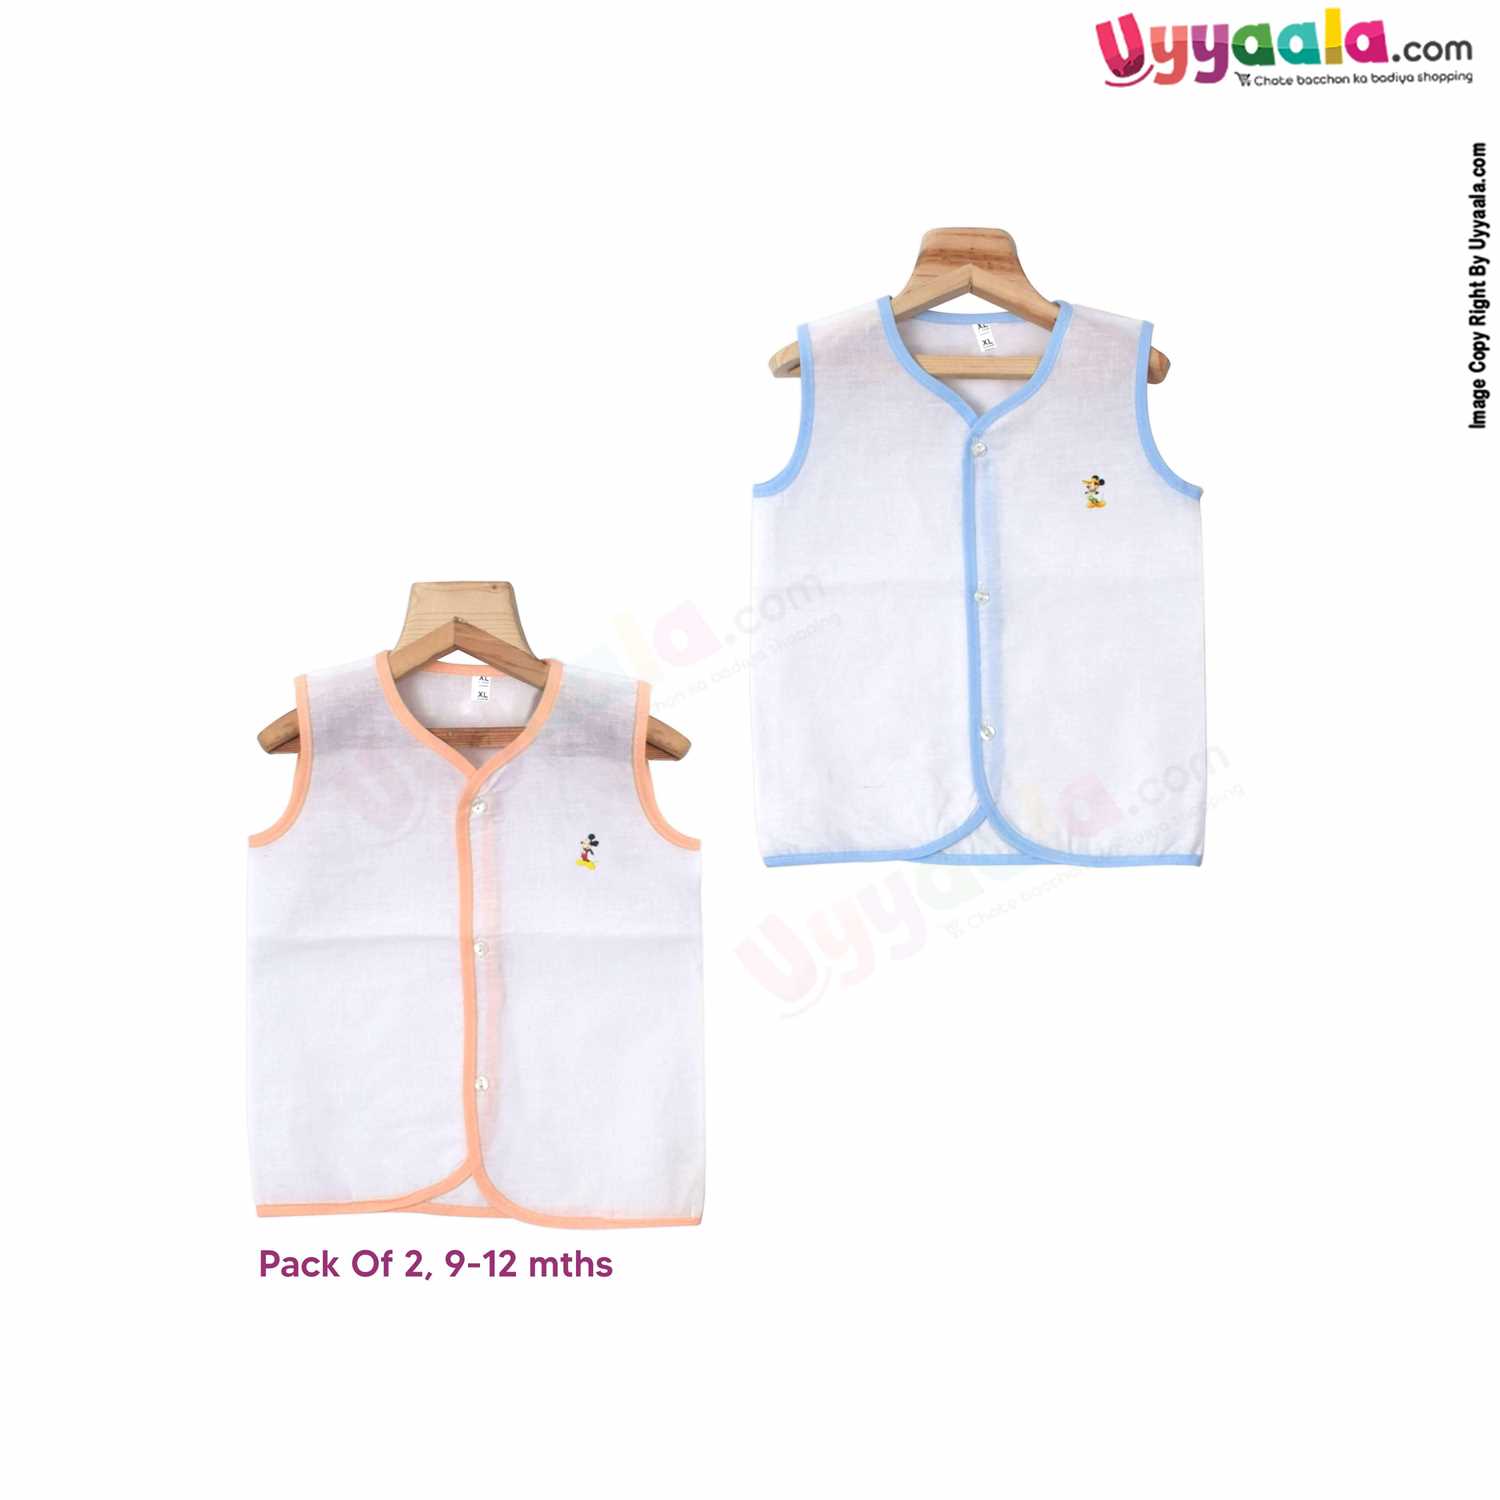 SNUG UP Sleeveless Baby Jabla Set, Front Opening Button Model, Premium Quality Cotton Baby Wear, (9-12M) XL, 2Pack